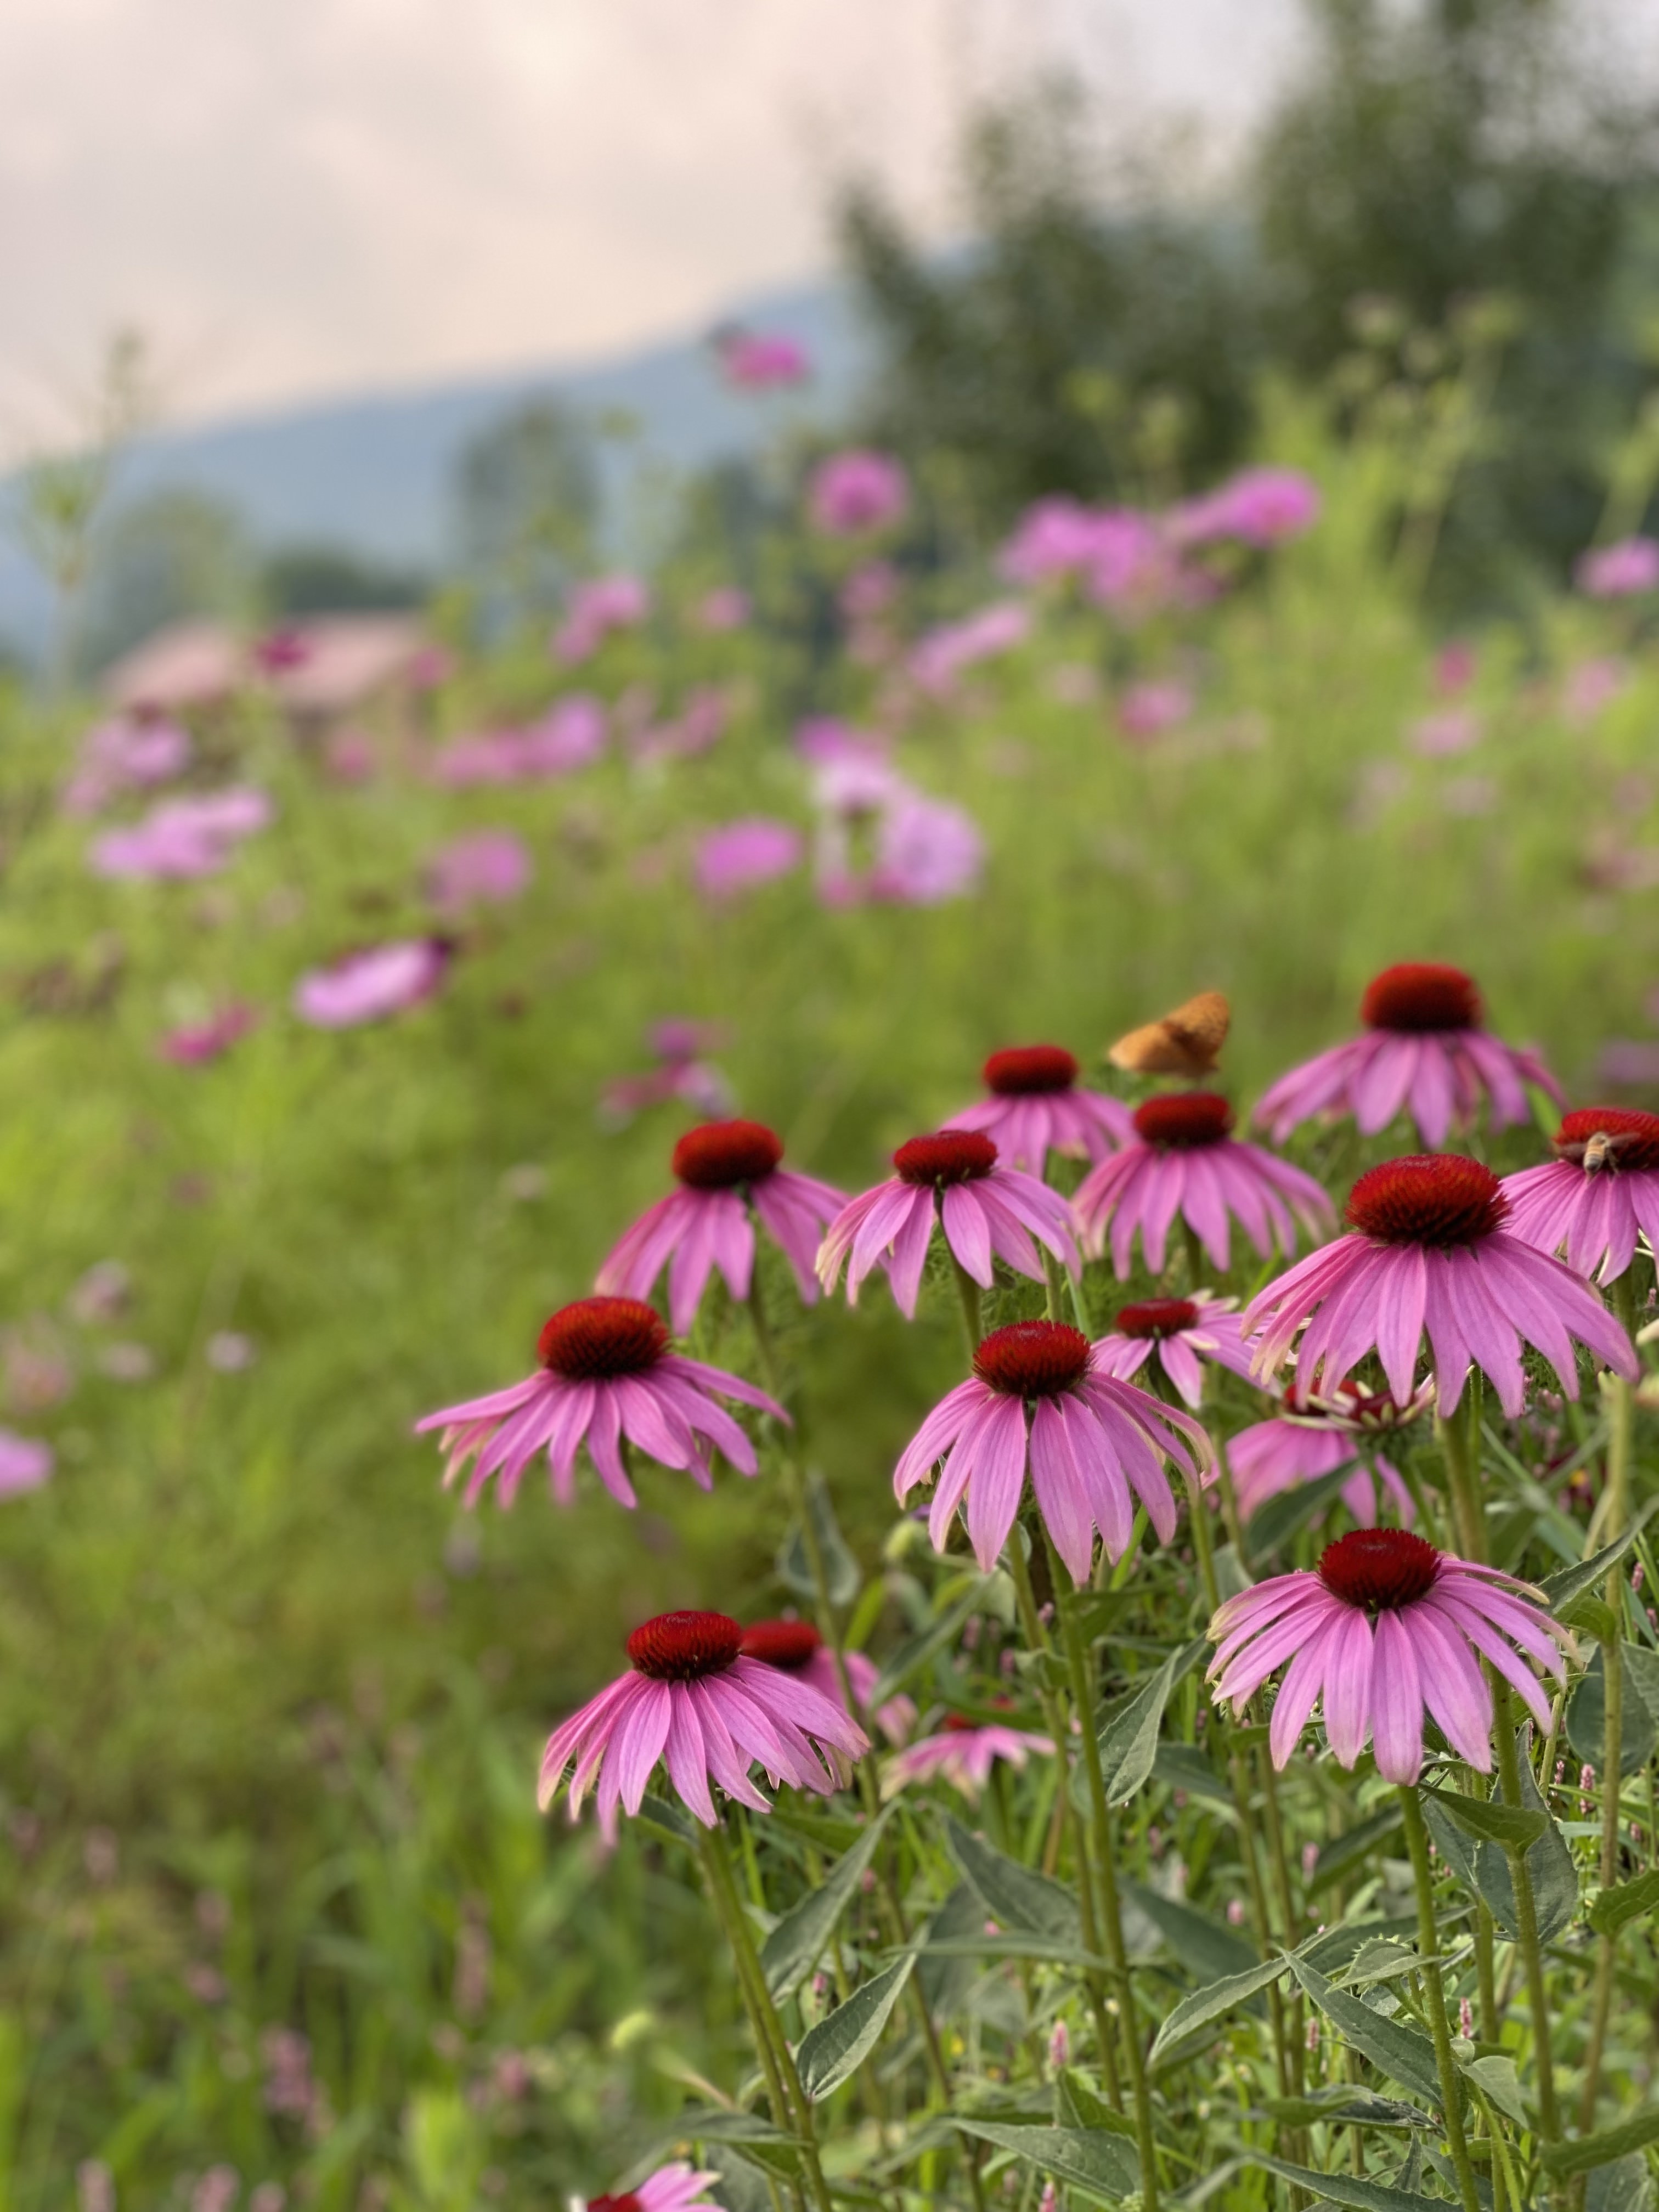 Echinacea: commonly known as the coneflower